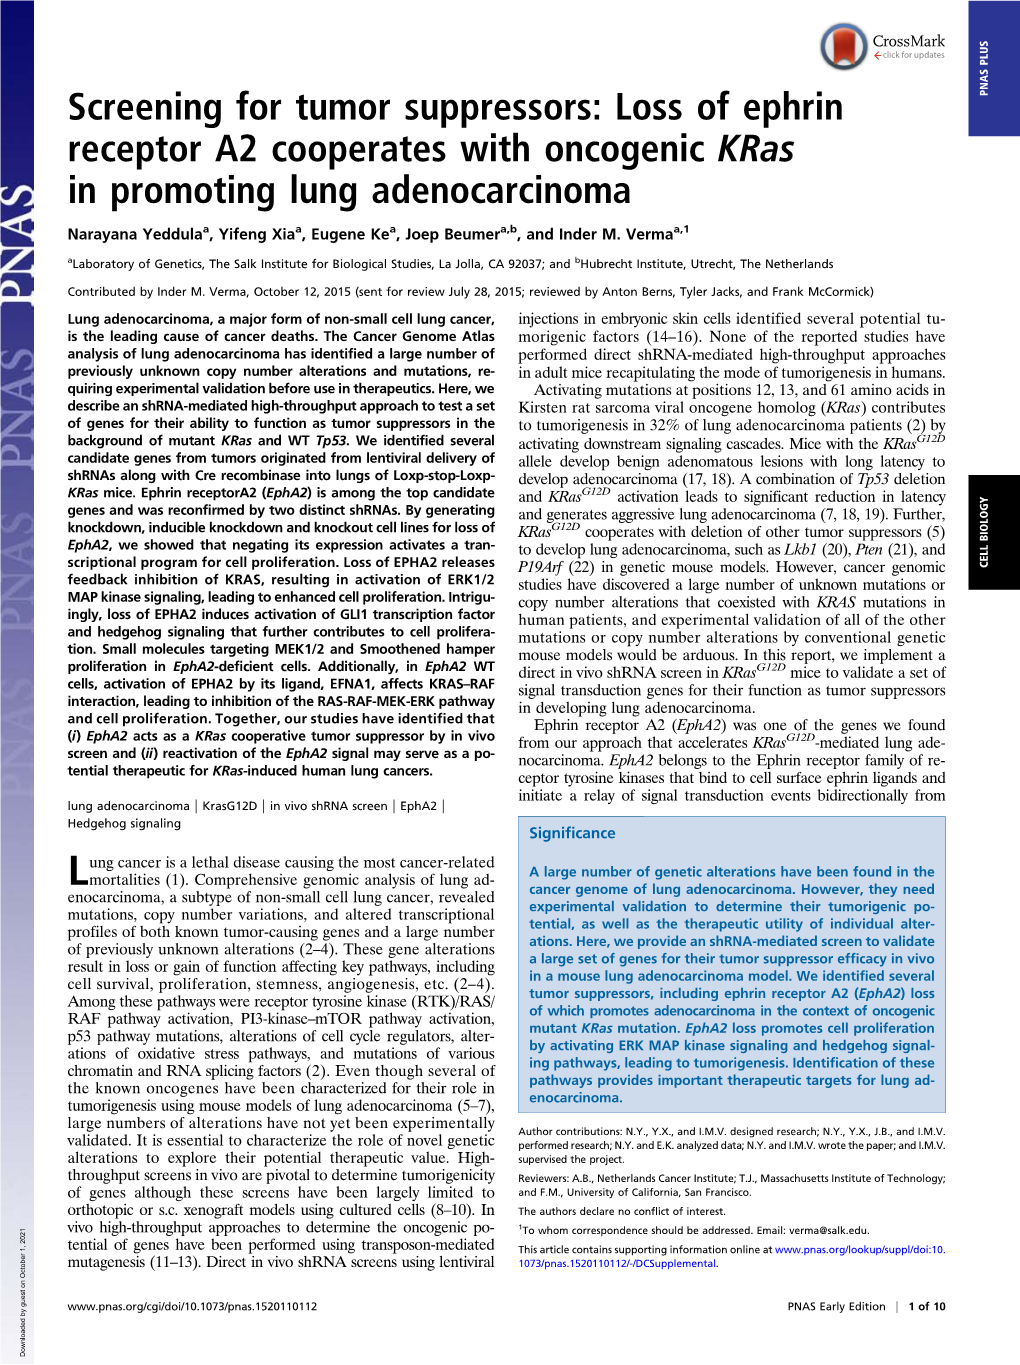 Screening for Tumor Suppressors: Loss of Ephrin PNAS PLUS Receptor A2 Cooperates with Oncogenic Kras in Promoting Lung Adenocarcinoma